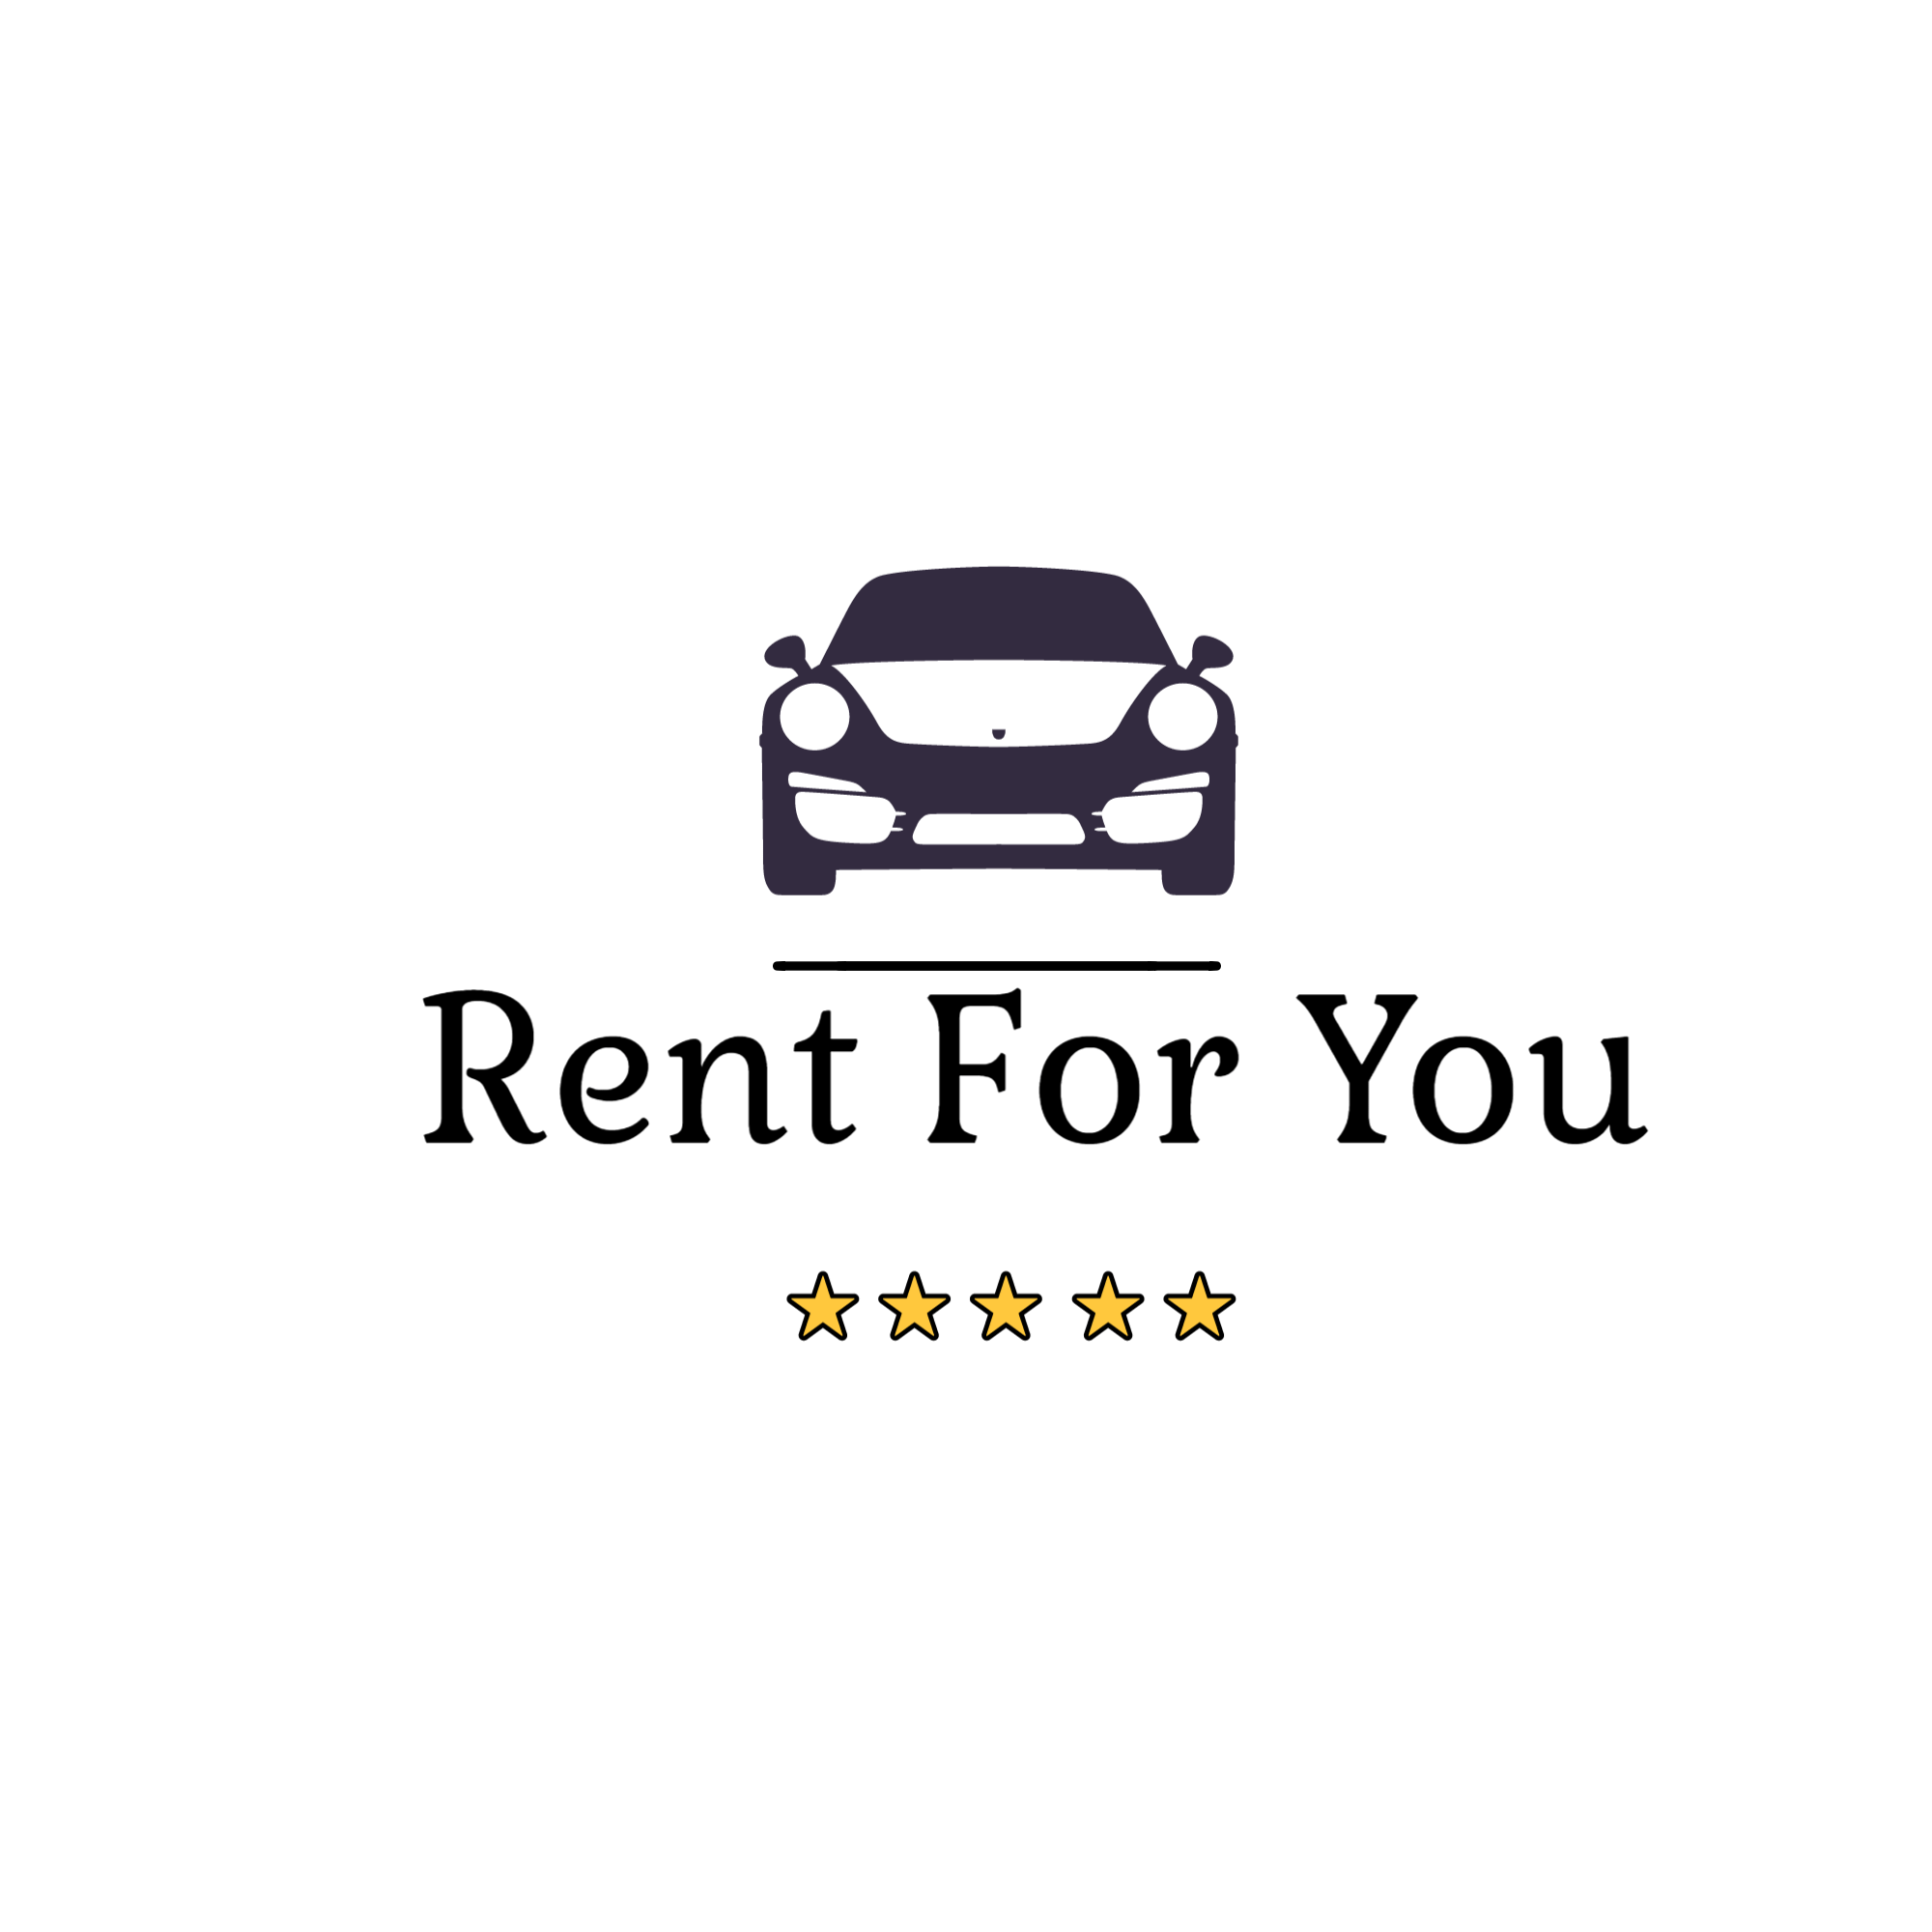 RENT FOR YOU